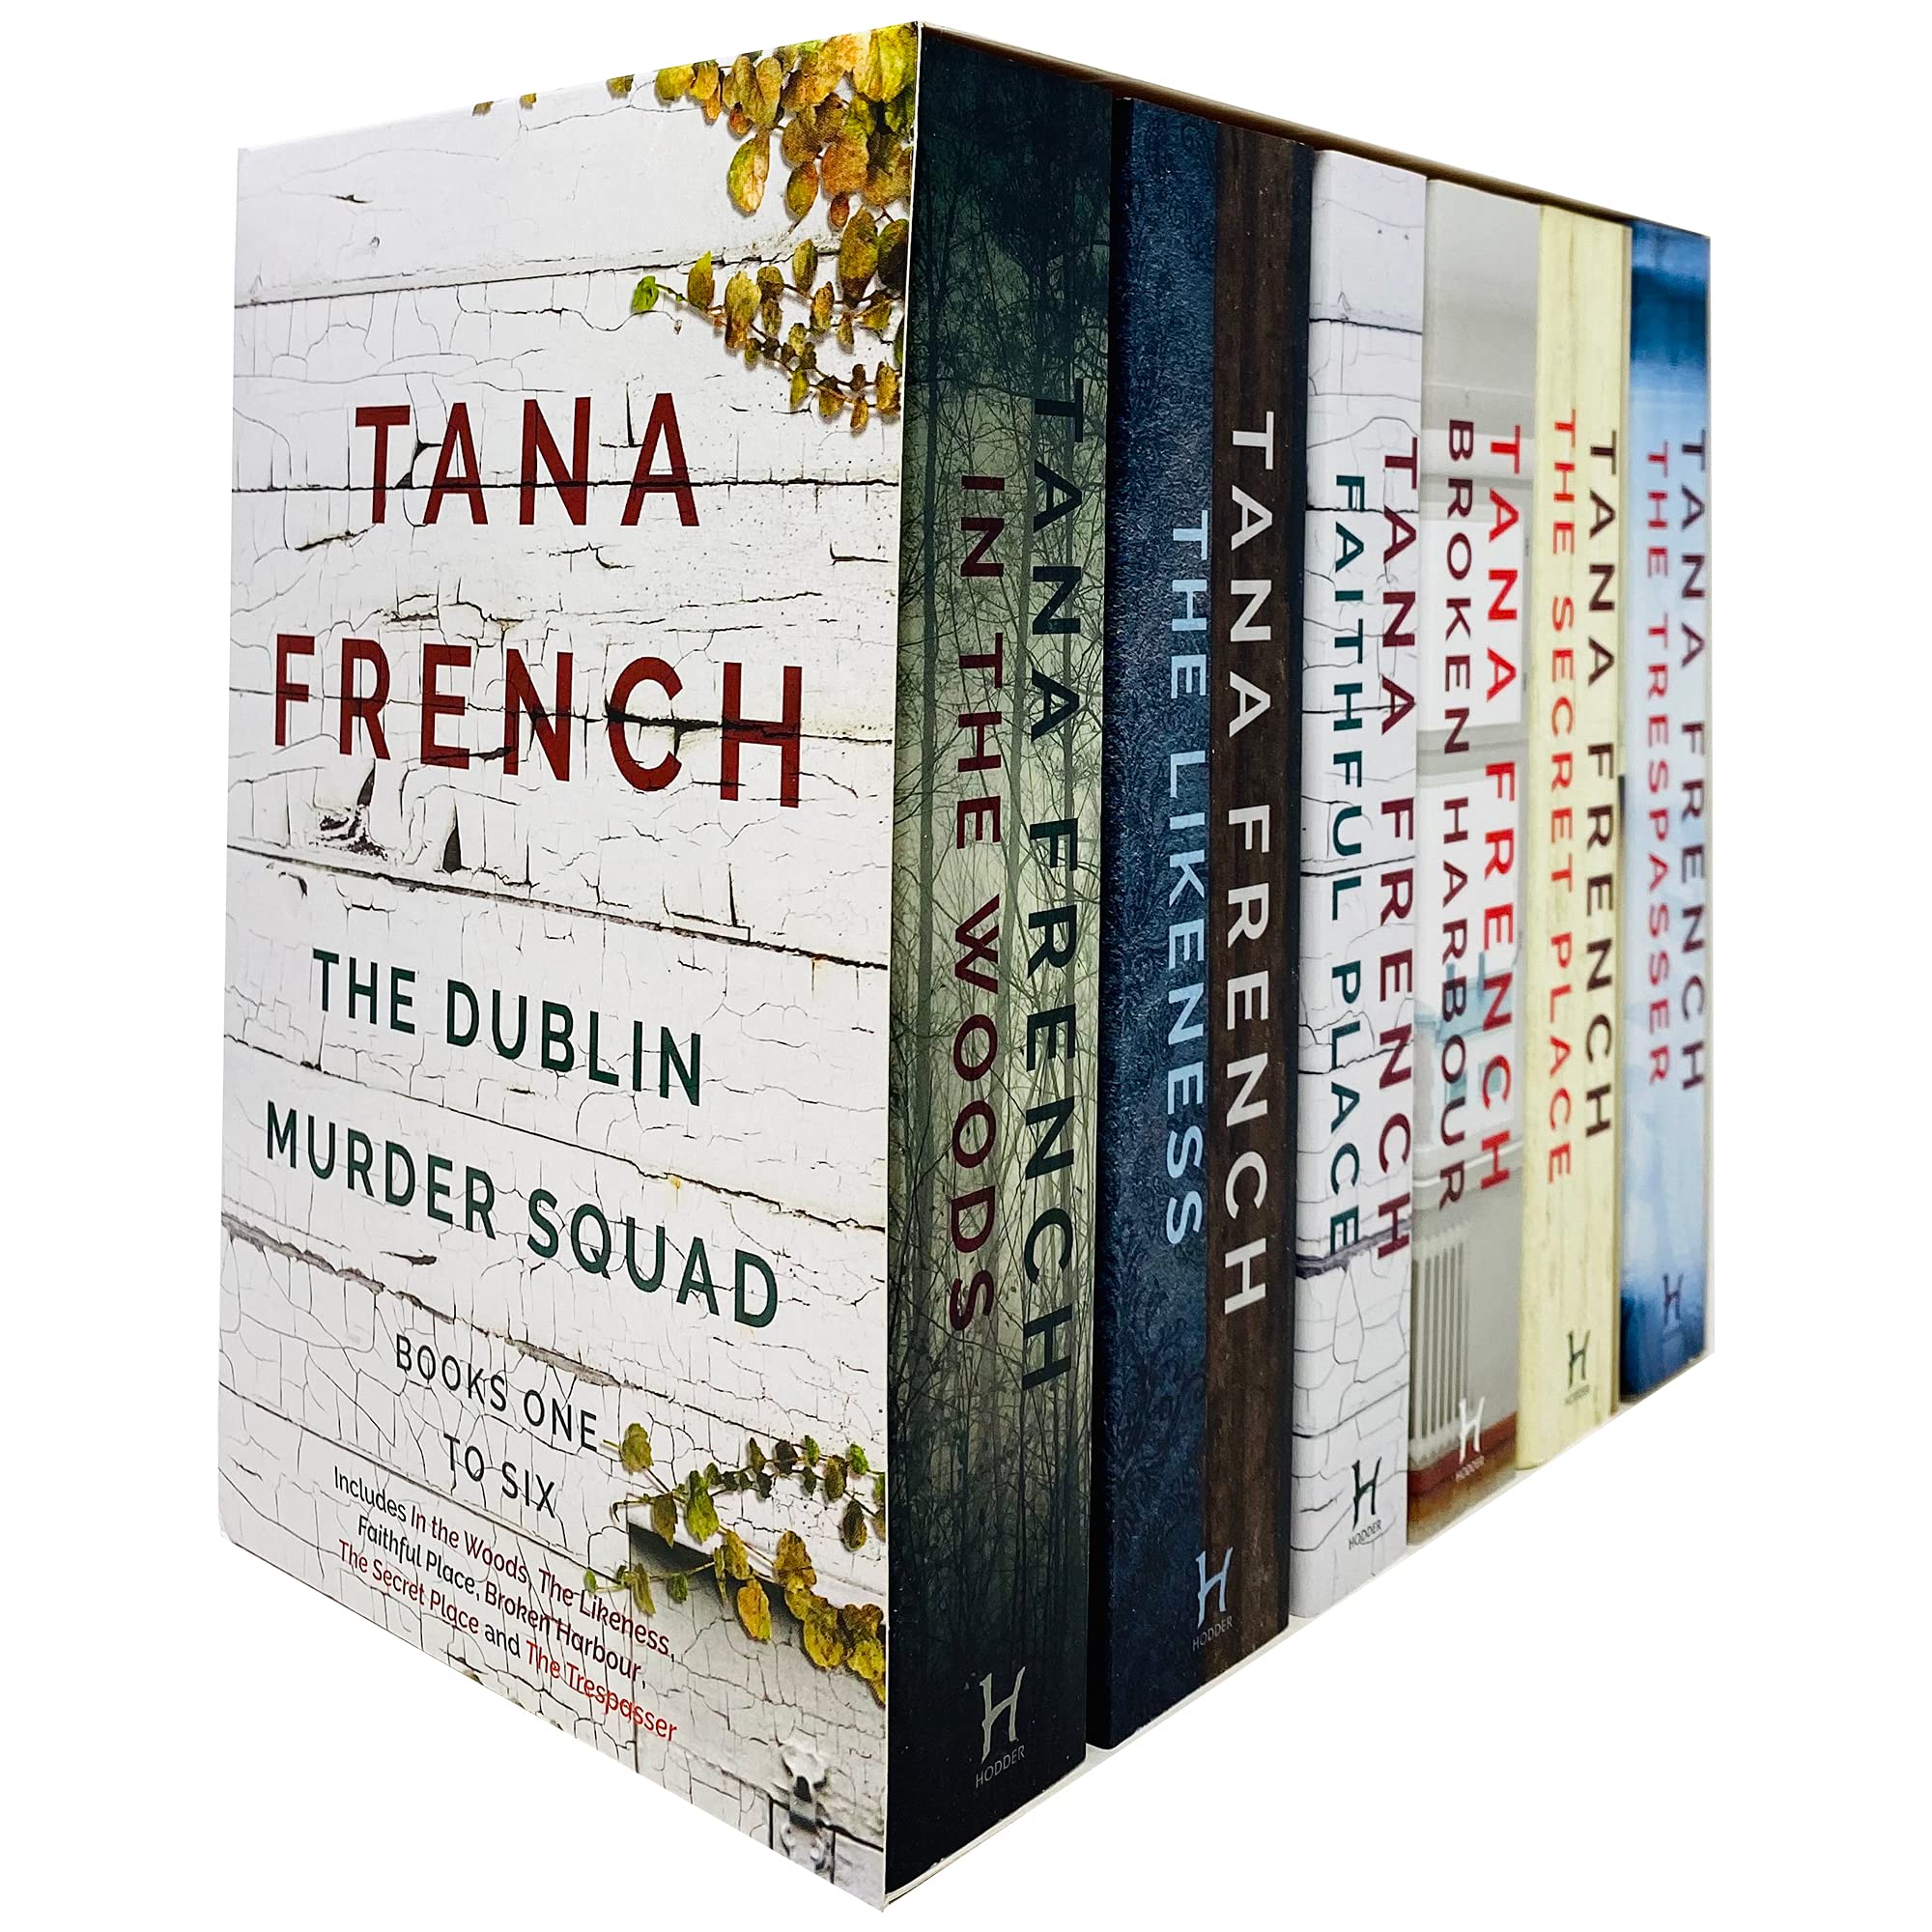 Dublin Murder Squad Series Books 1 - 6 Collection Box Set by Tana French Paperback - Lets Buy Books